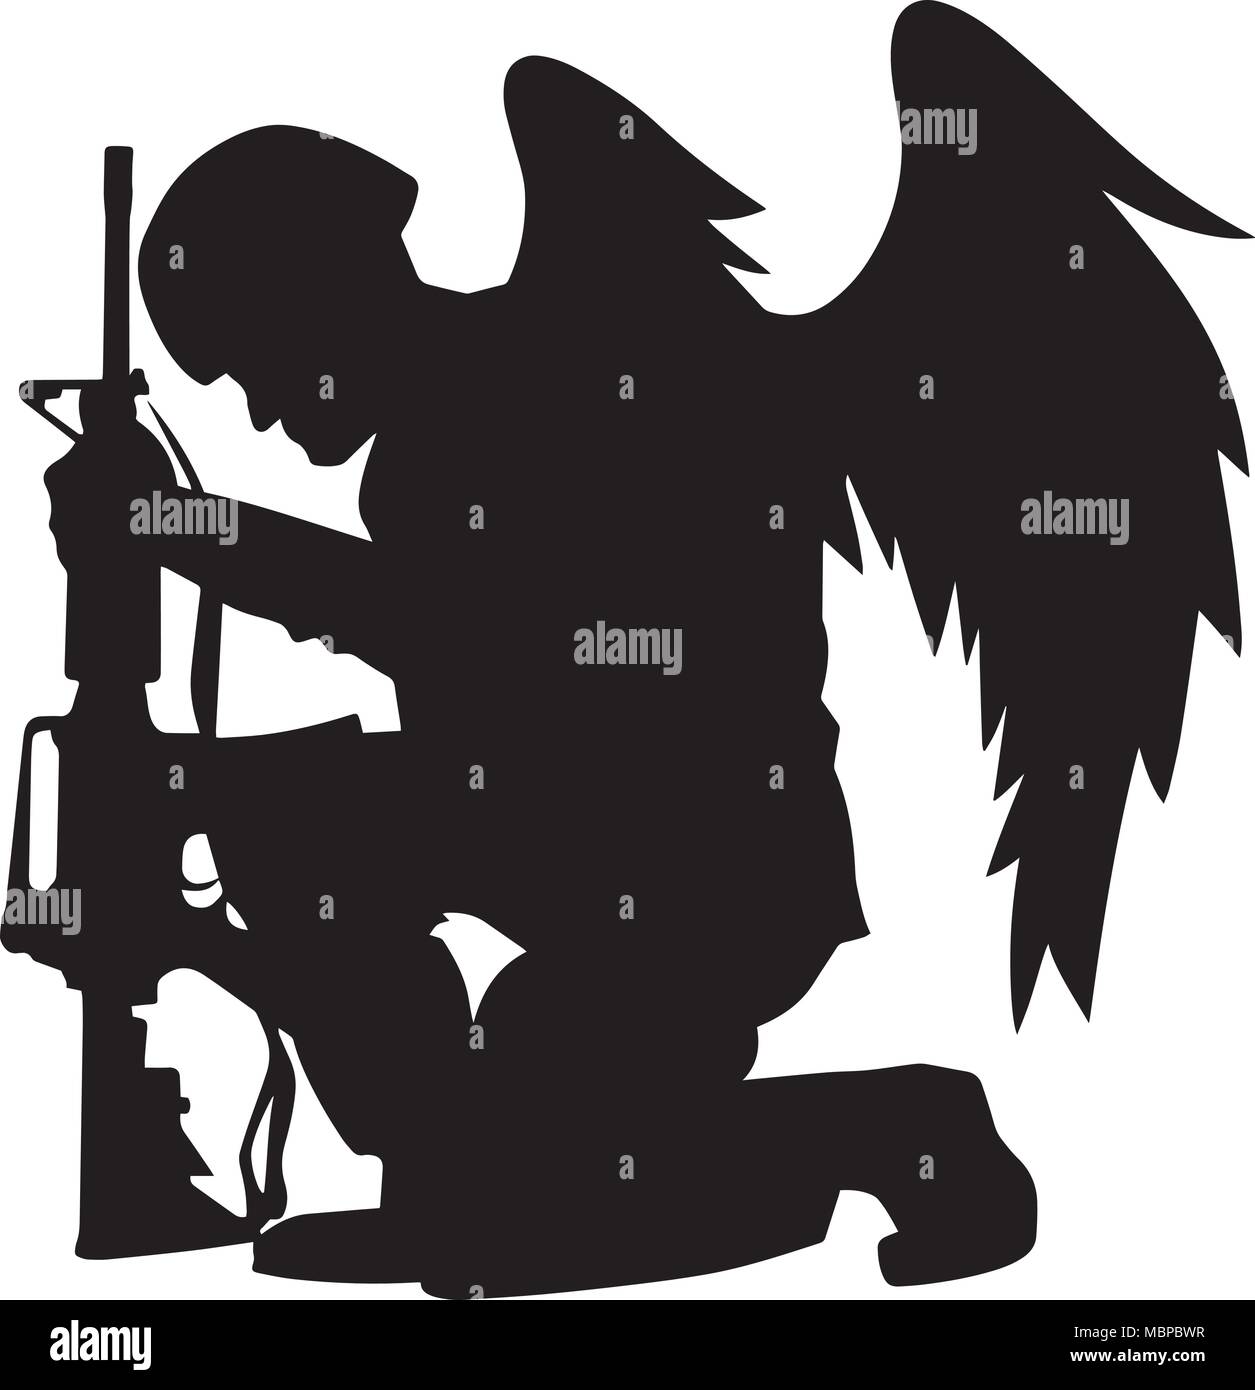 Military Angel Soldier With Wings Kneeling Silhouette Vector Illustration Stock Vector